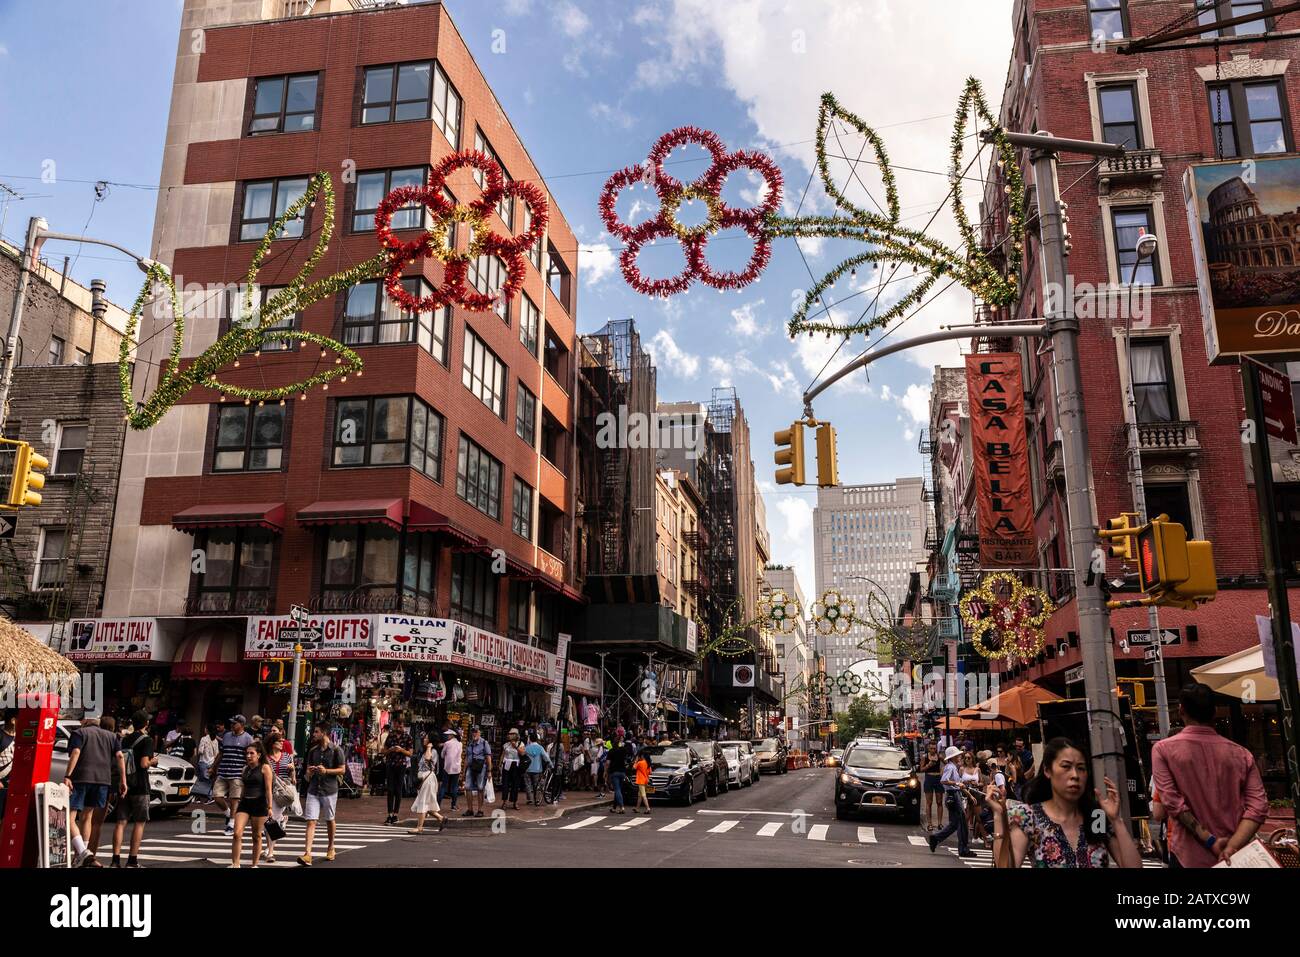 New York City, USA - August 2, 2018: Street with many restaurants and shops with people around in Little Italy, Lower Manhattan, New York City, USA Stock Photo